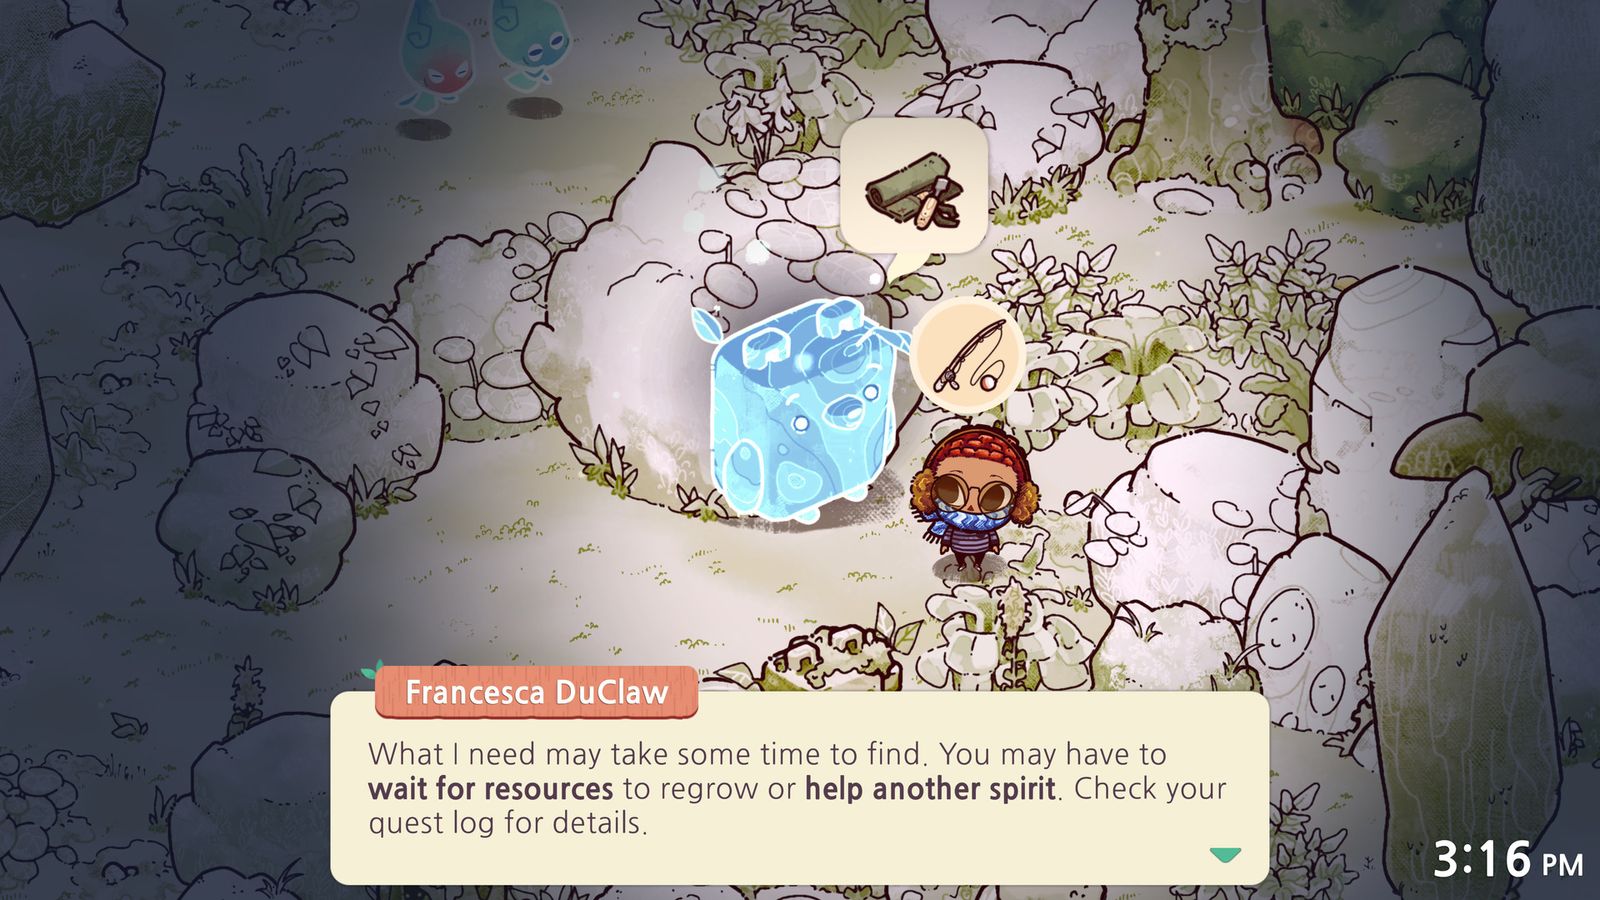 In-game image from Cozy Grove of a character in glasses and a red hat conversing with a blue creature.